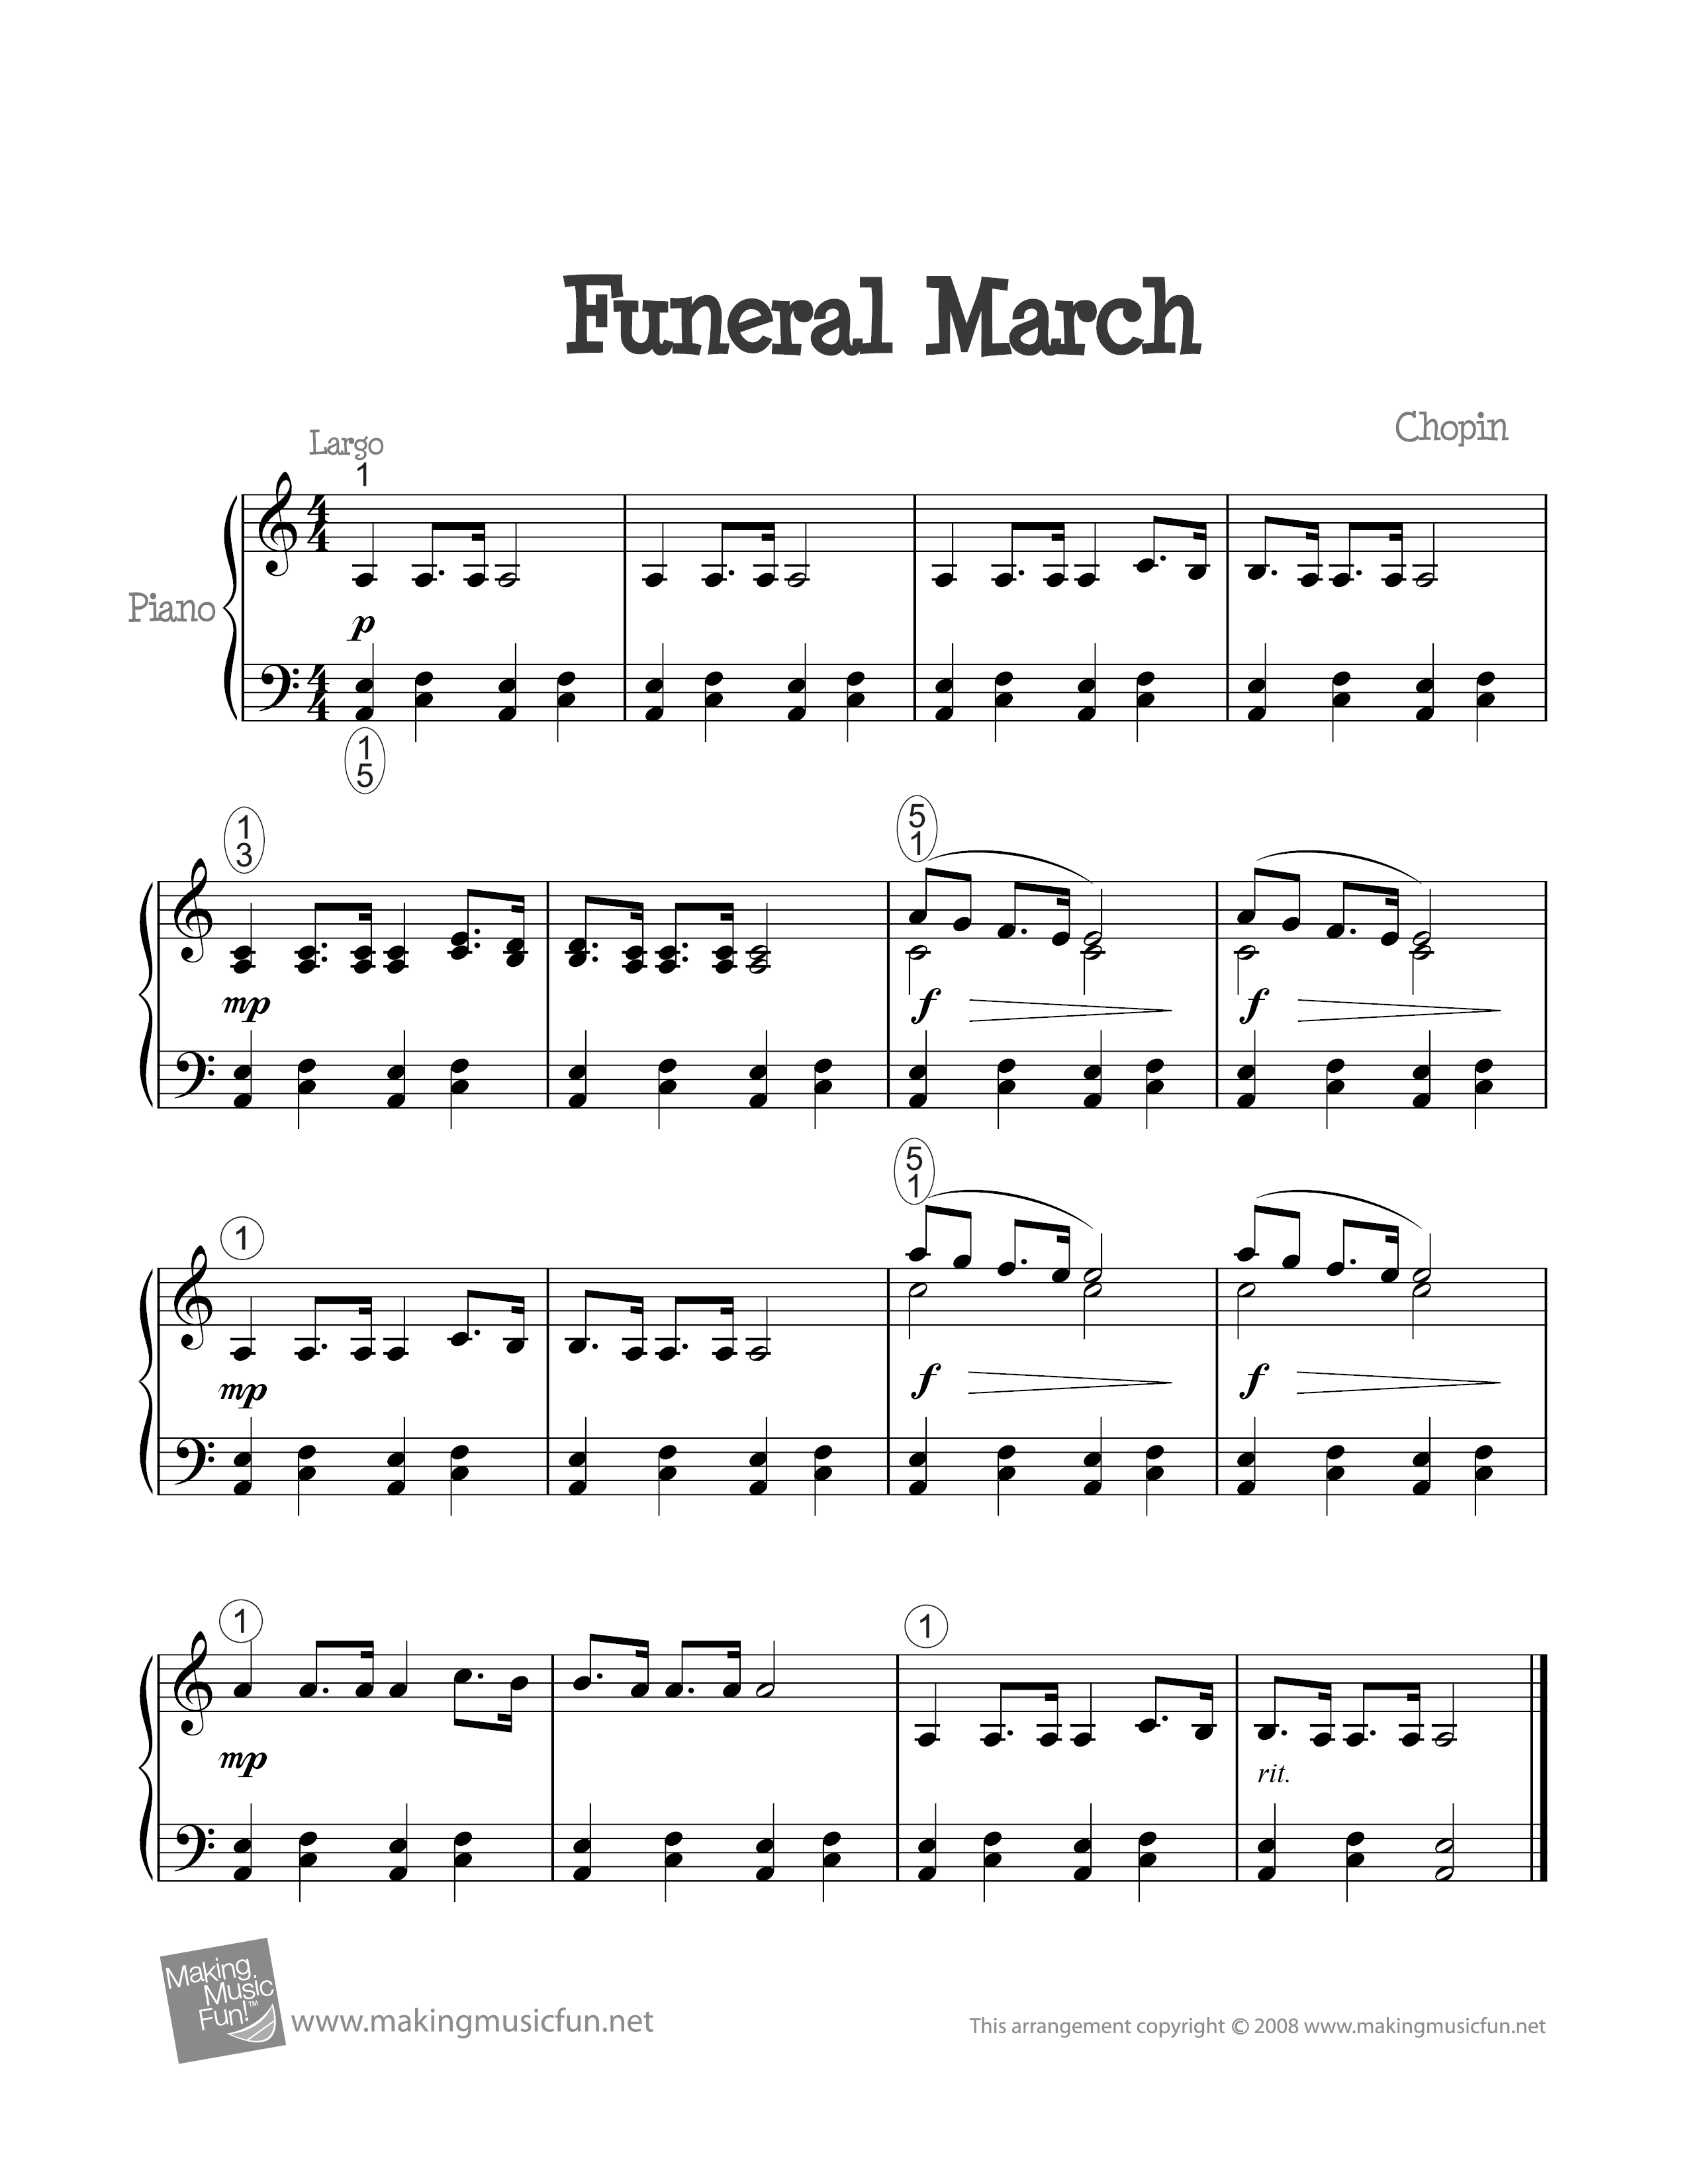 Funeral March Score